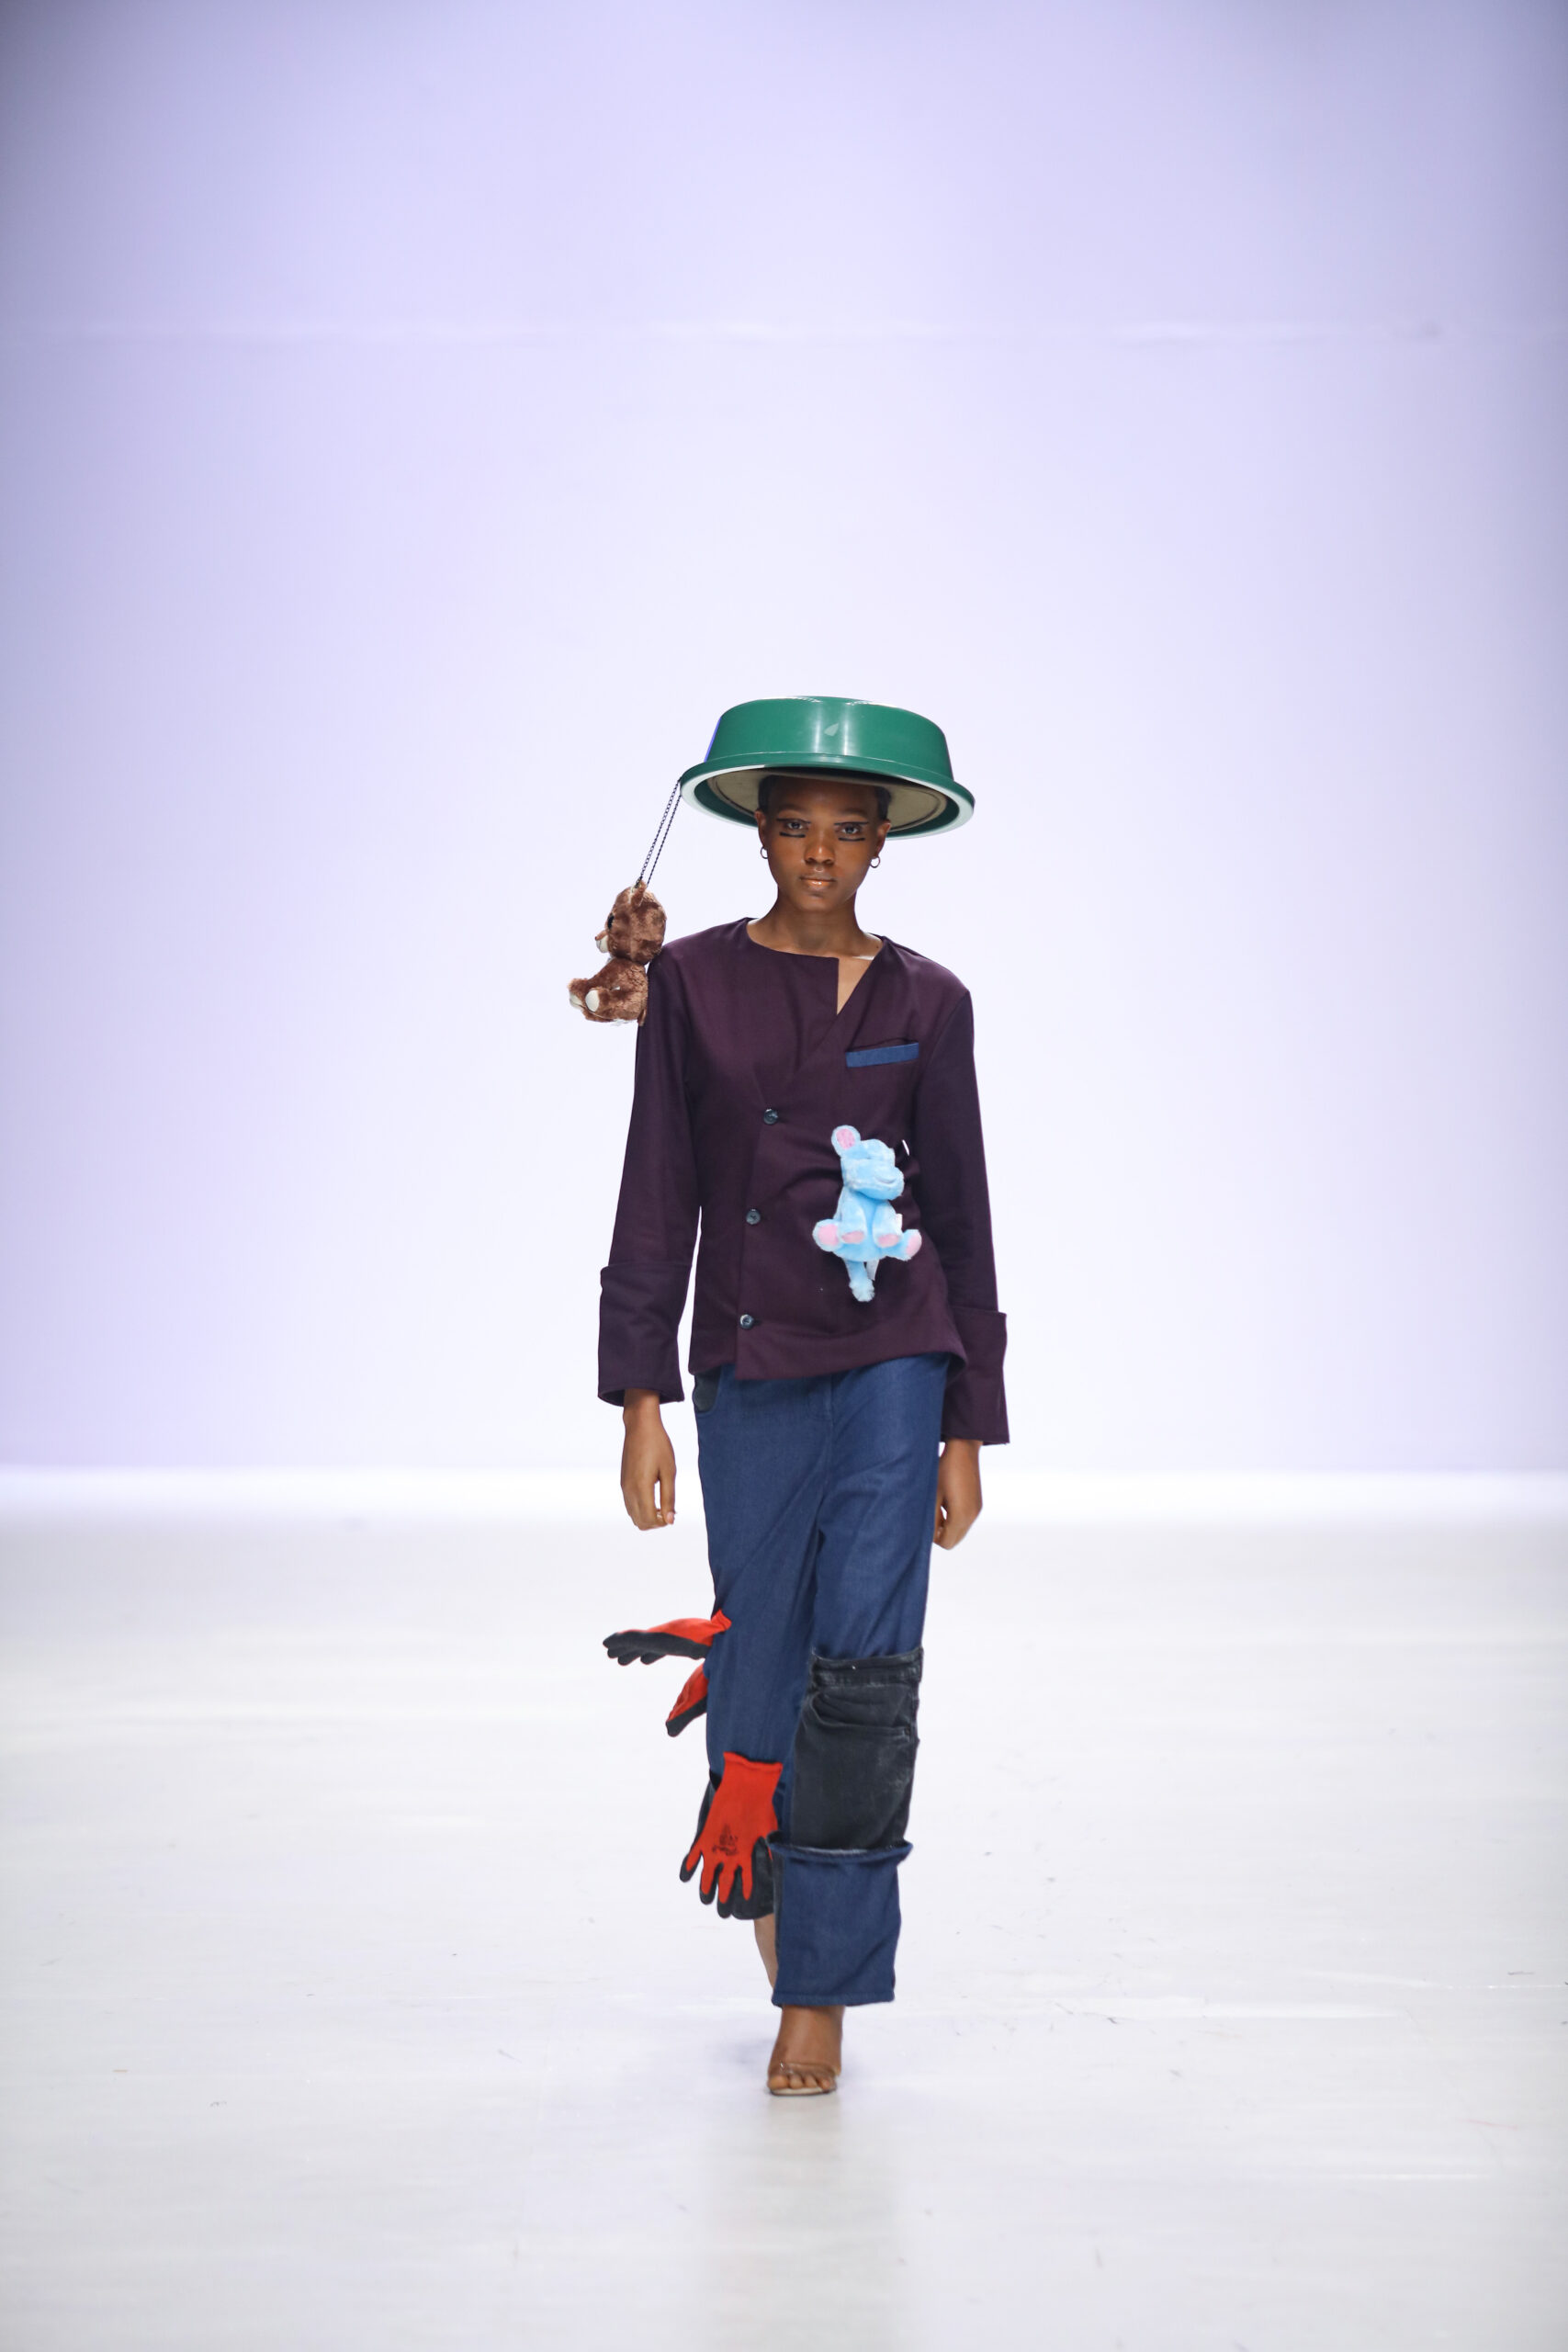 Look one from LFW's green access 2022 finalist - SVL designs